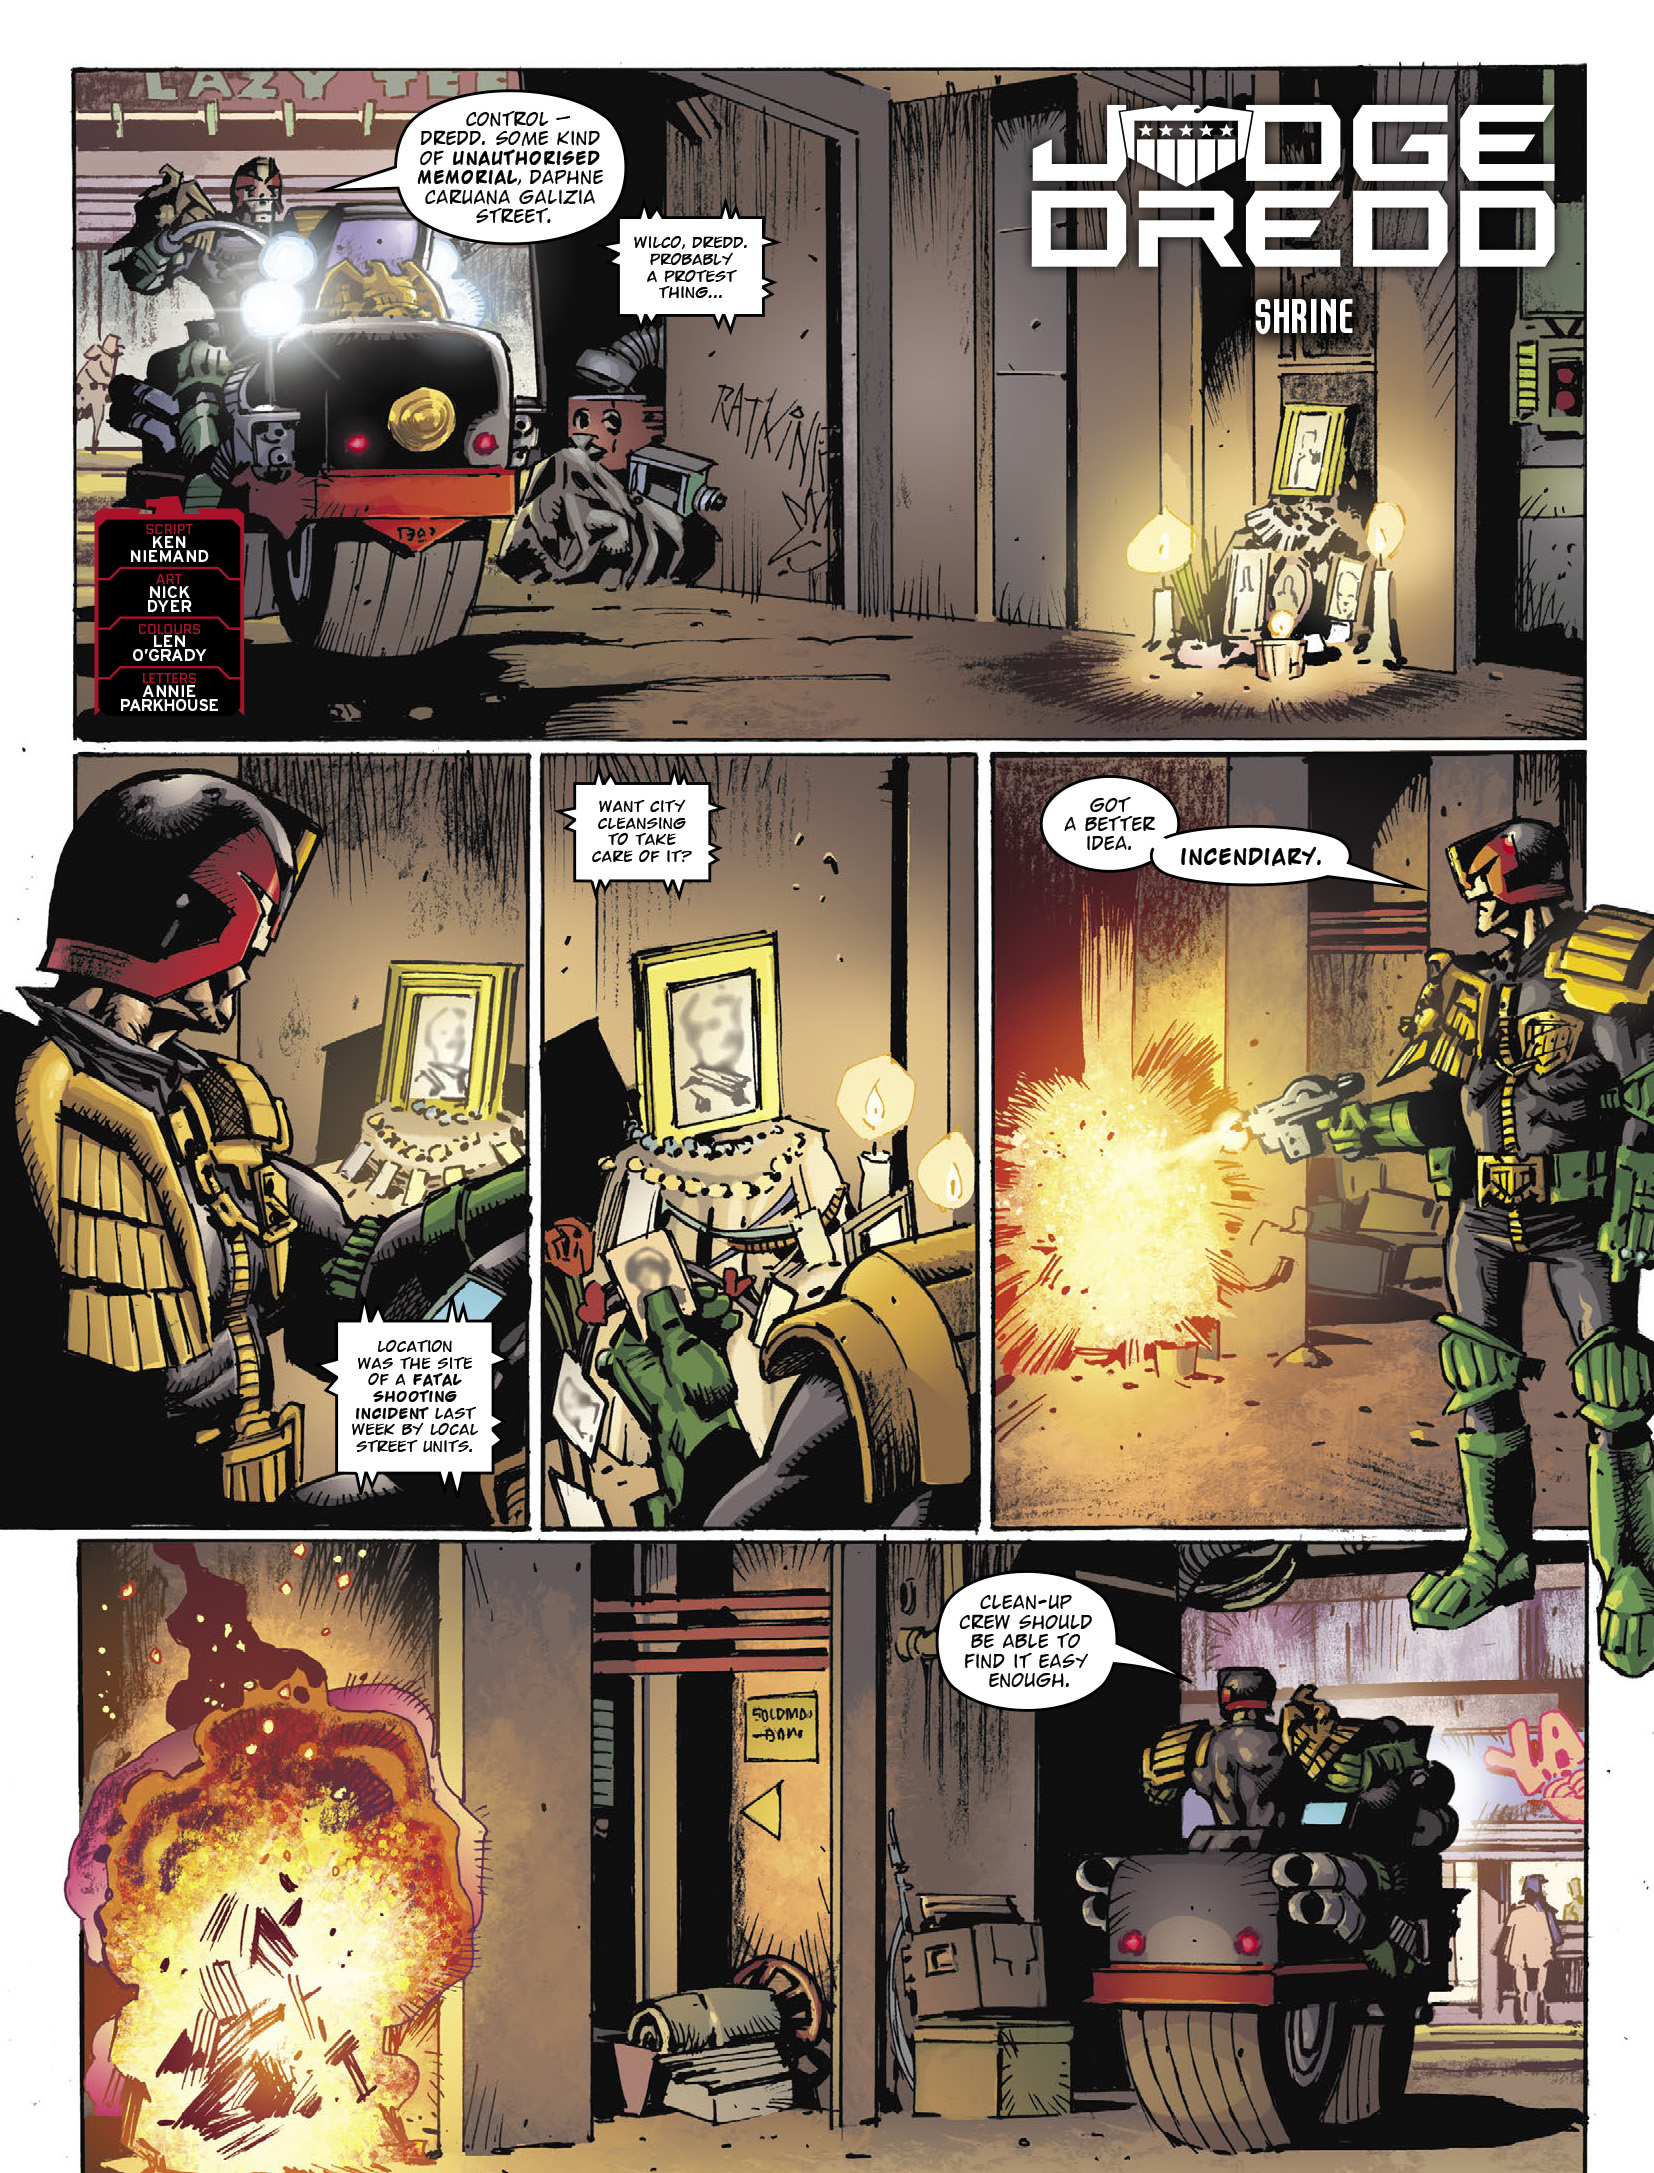 2000 AD: Chapter 2326 - Page 3